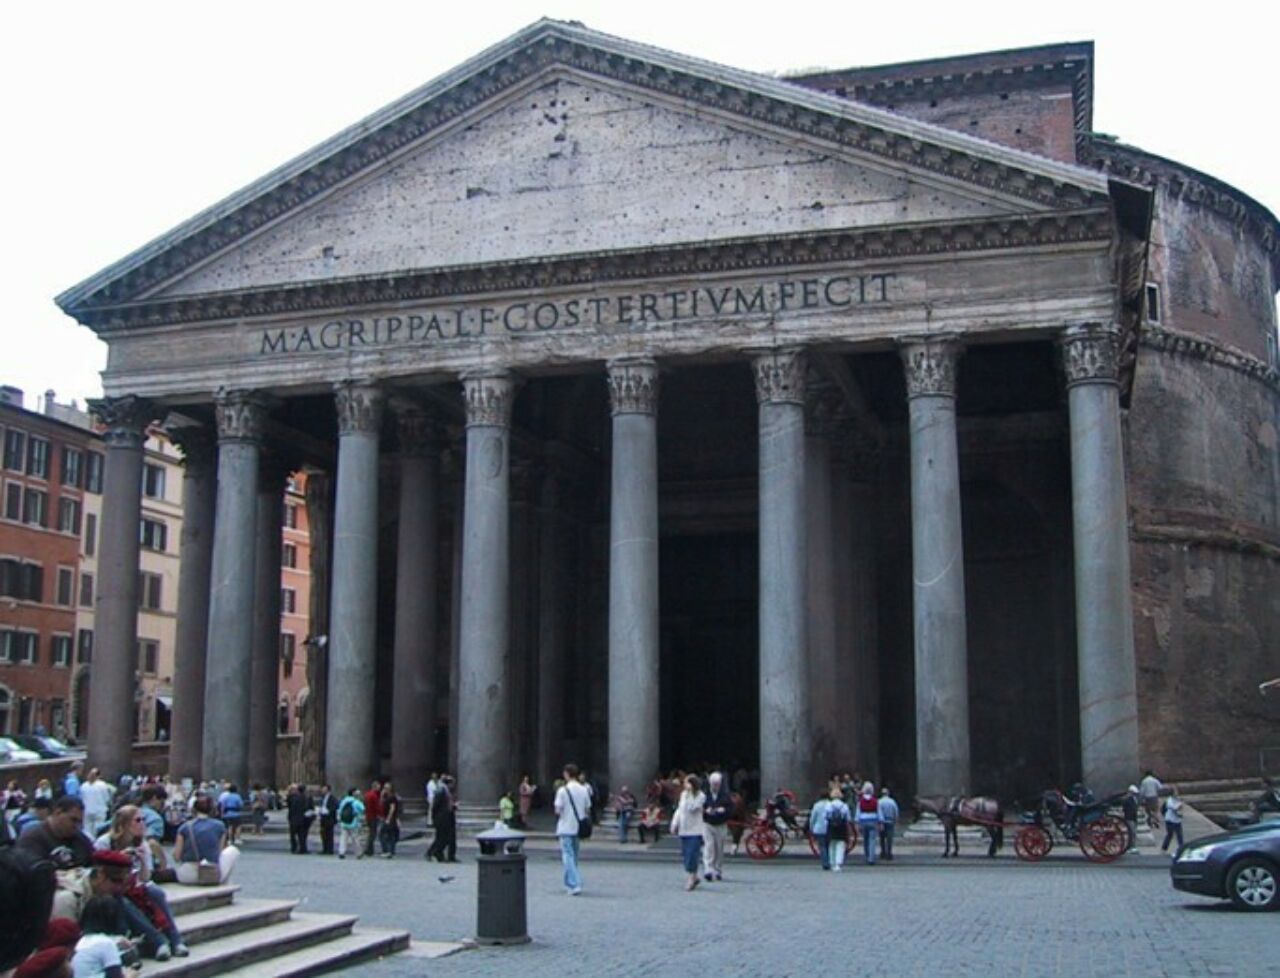 Students gathered on the street in front of the Pantheon in Rome, Italy.